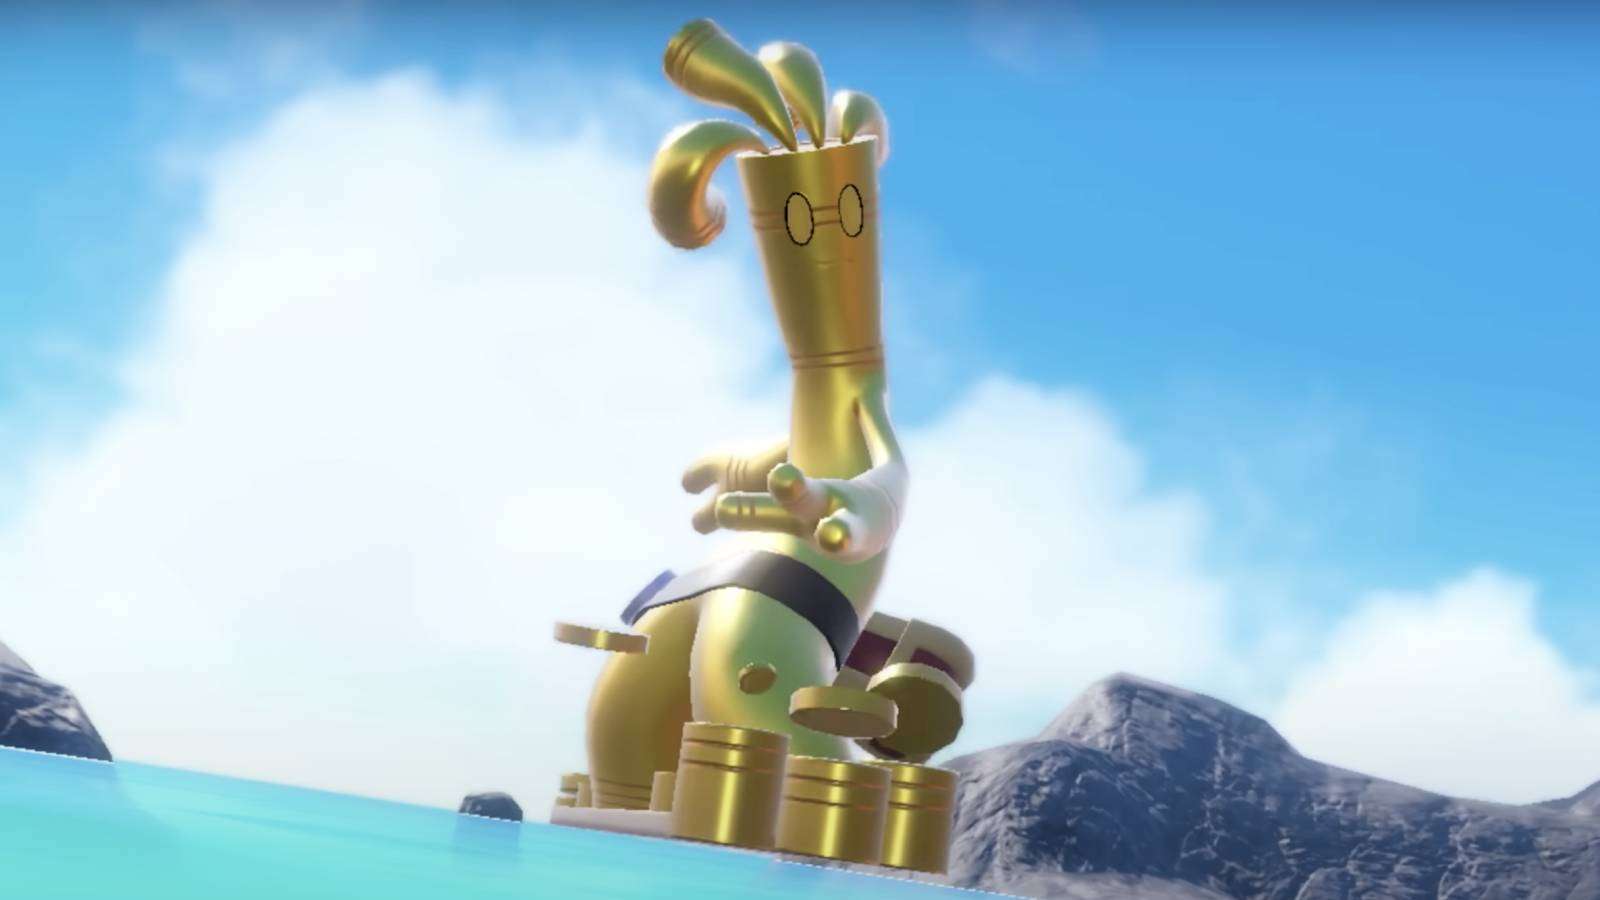 The golden Pokemon Gholdengo rides through the air, and above a body of water, on a surfboard made out of coin